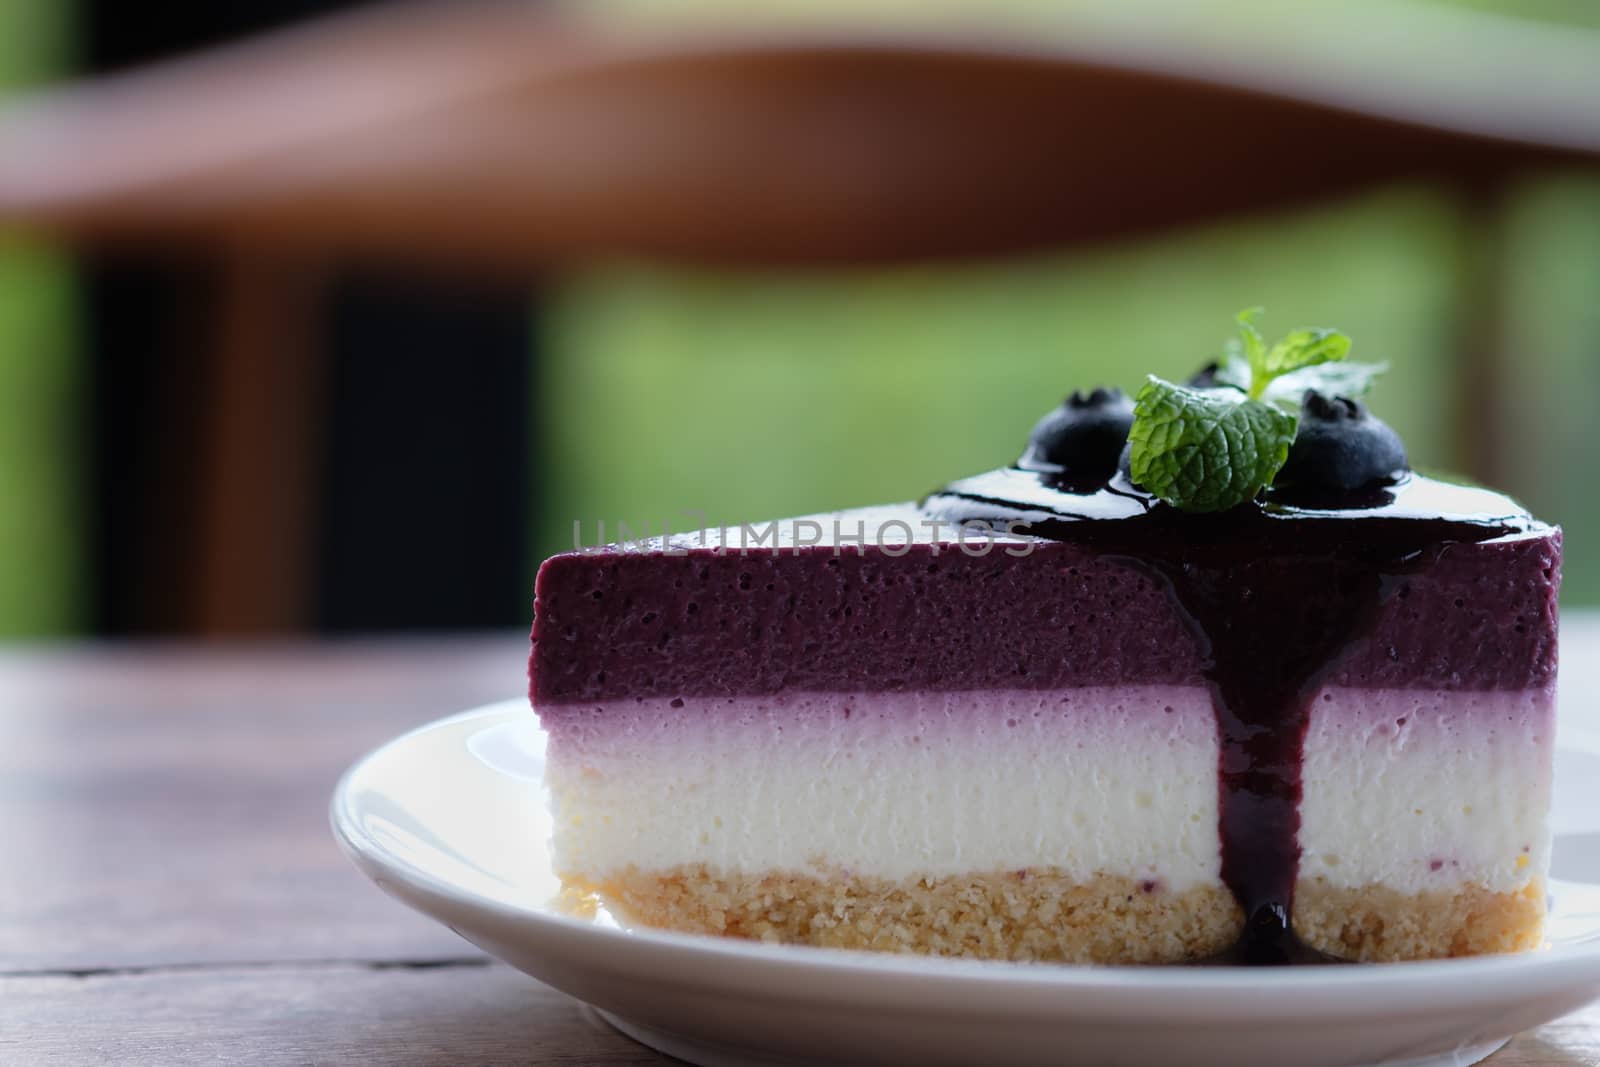 Blueberry Mousse Cake Topped with  fresh Blueberries and mint leaves.